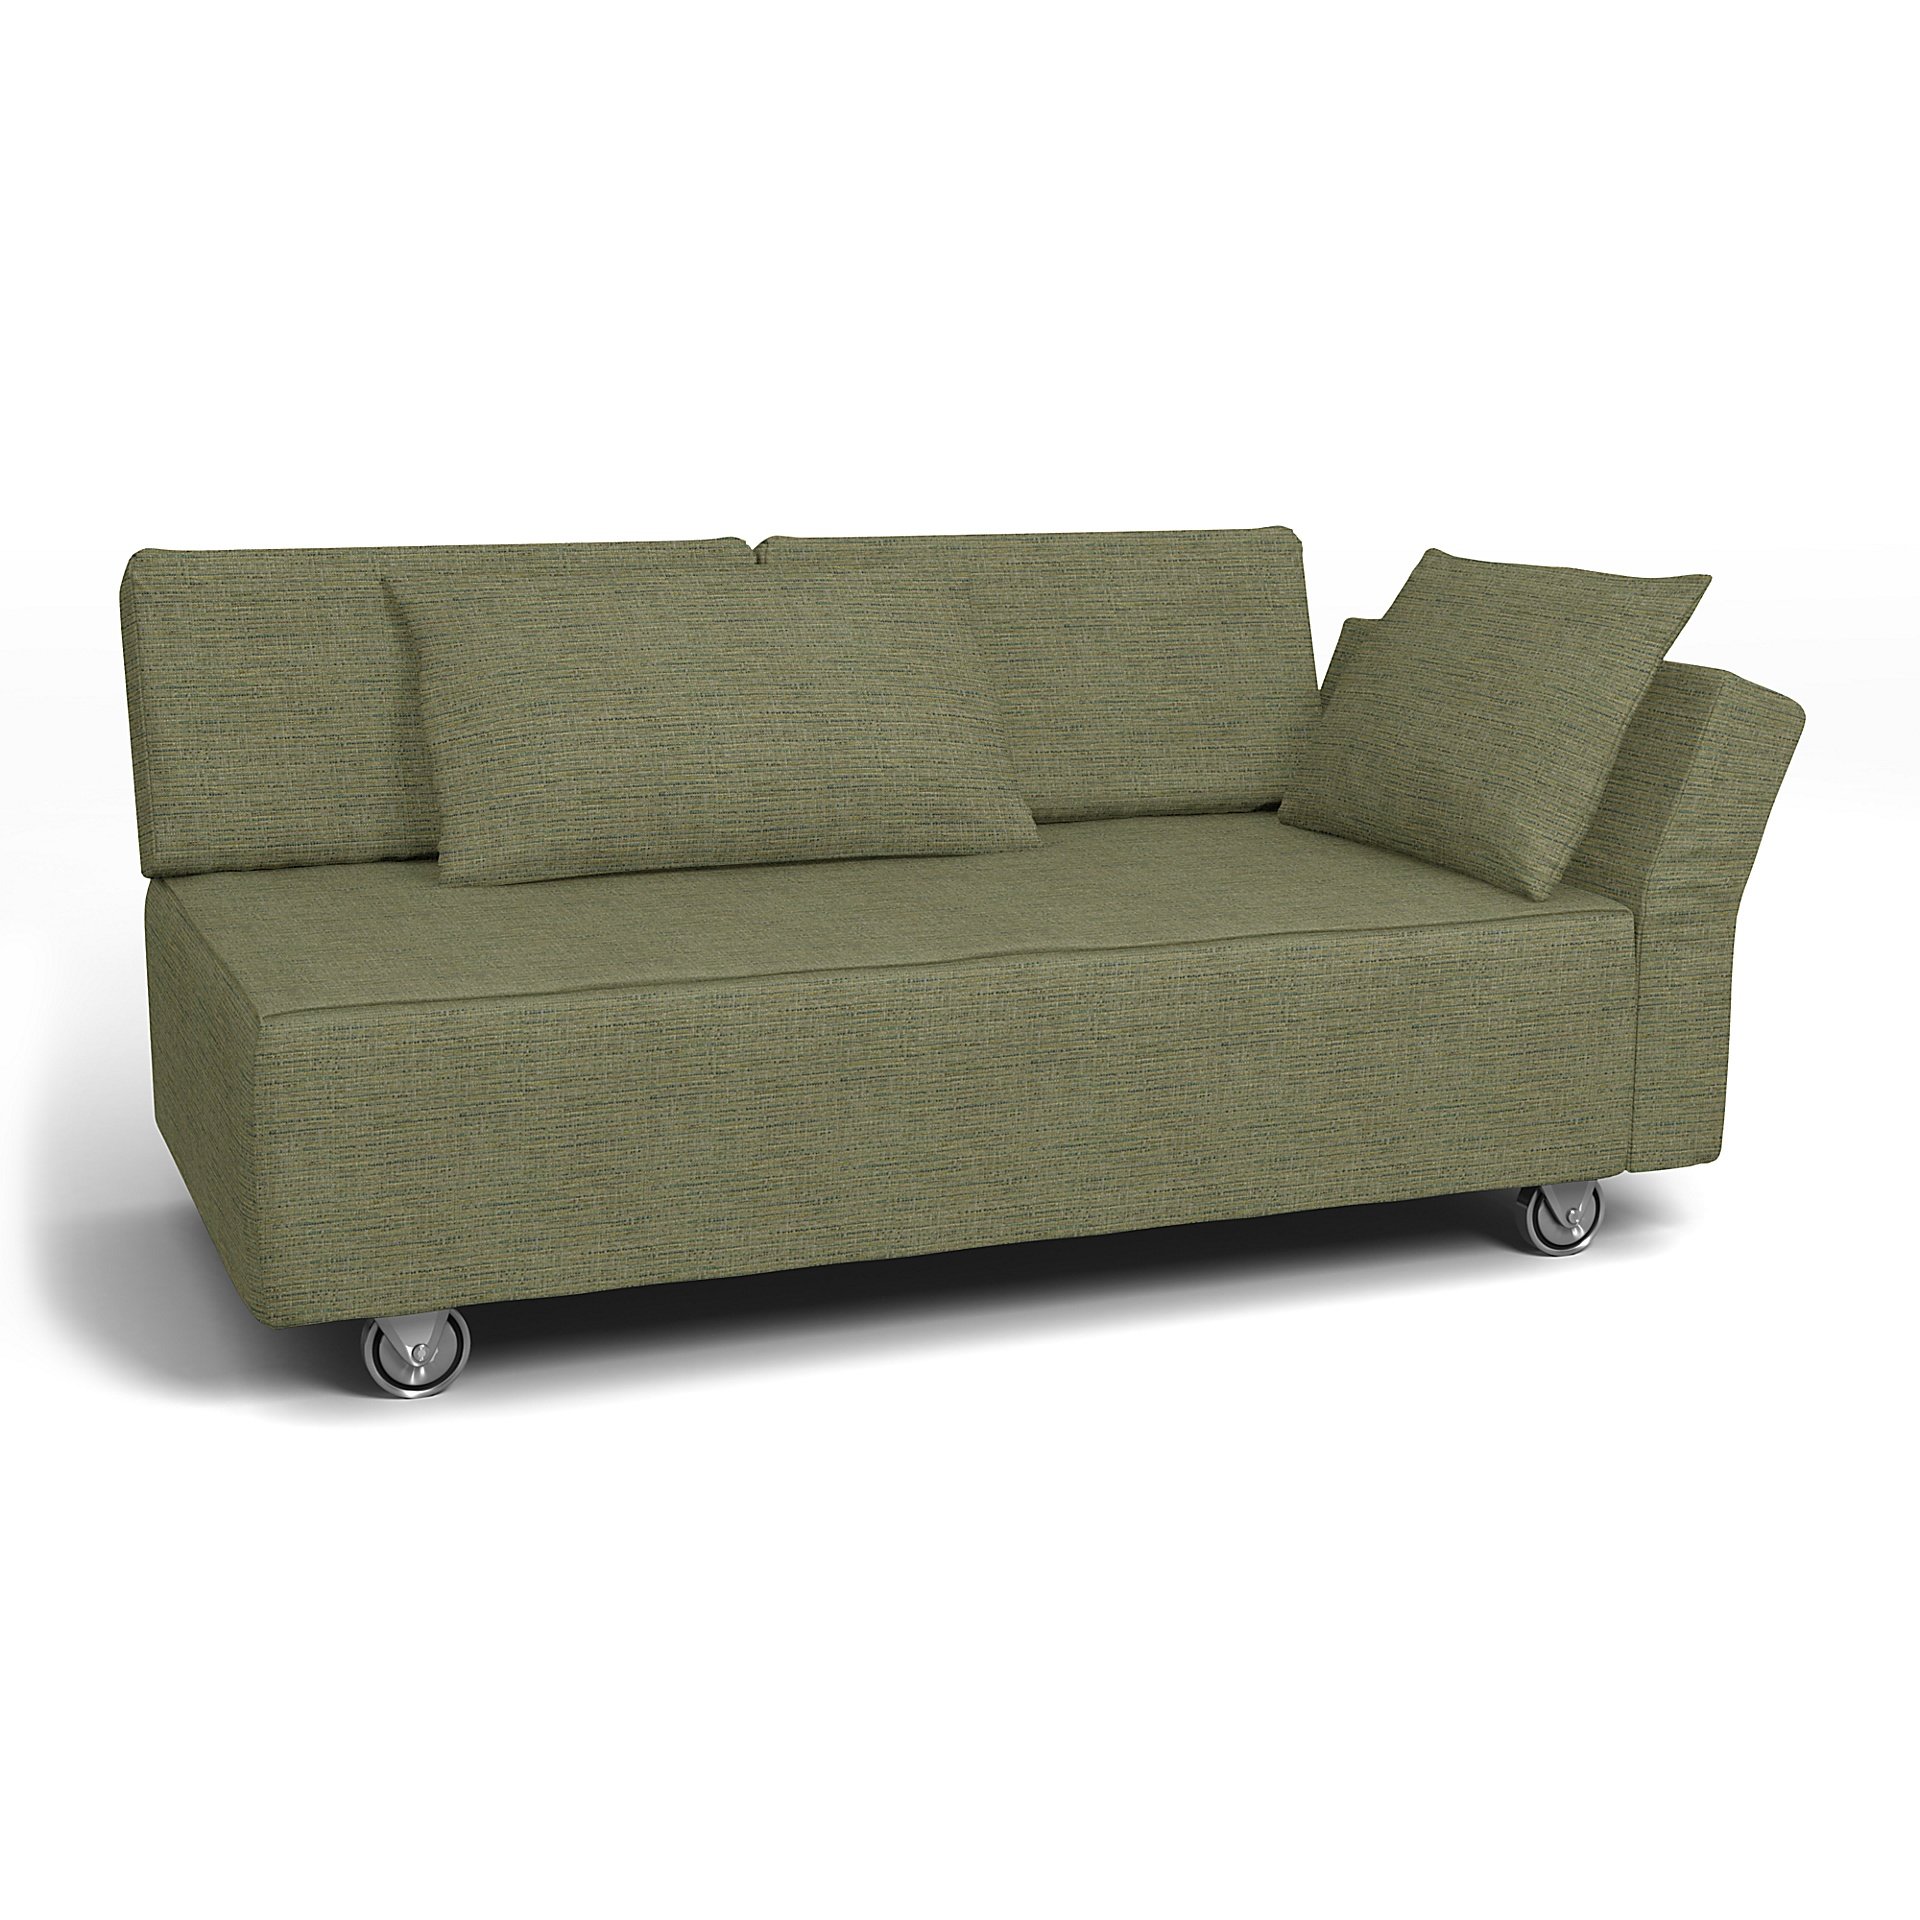 IKEA - Falsterbo 2 Seat Sofa with Right Arm Cover, Meadow Green, Boucle & Texture - Bemz